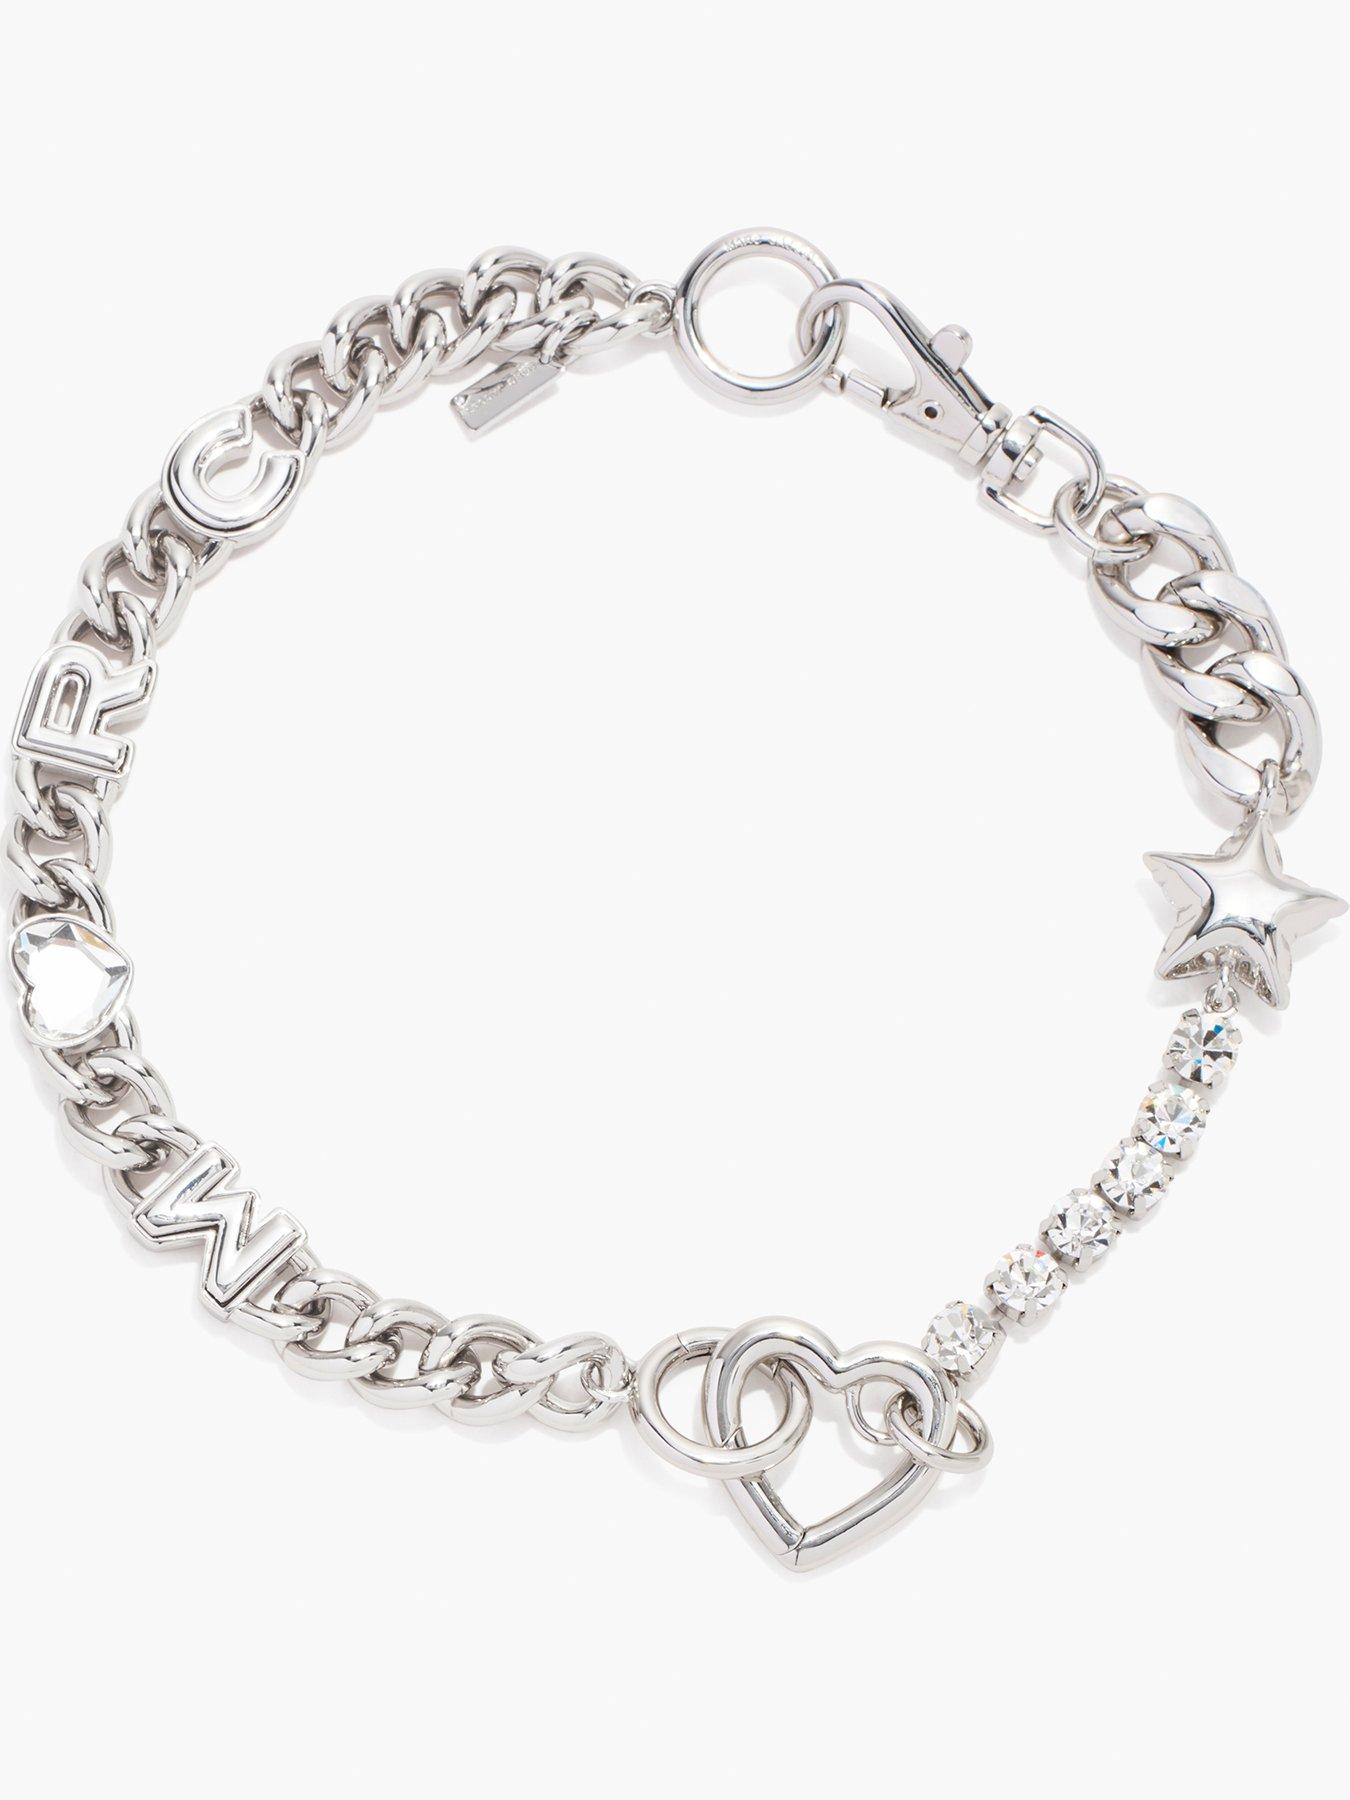 MARC JACOBS The Heart Chain Necklace - Silver | very.co.uk